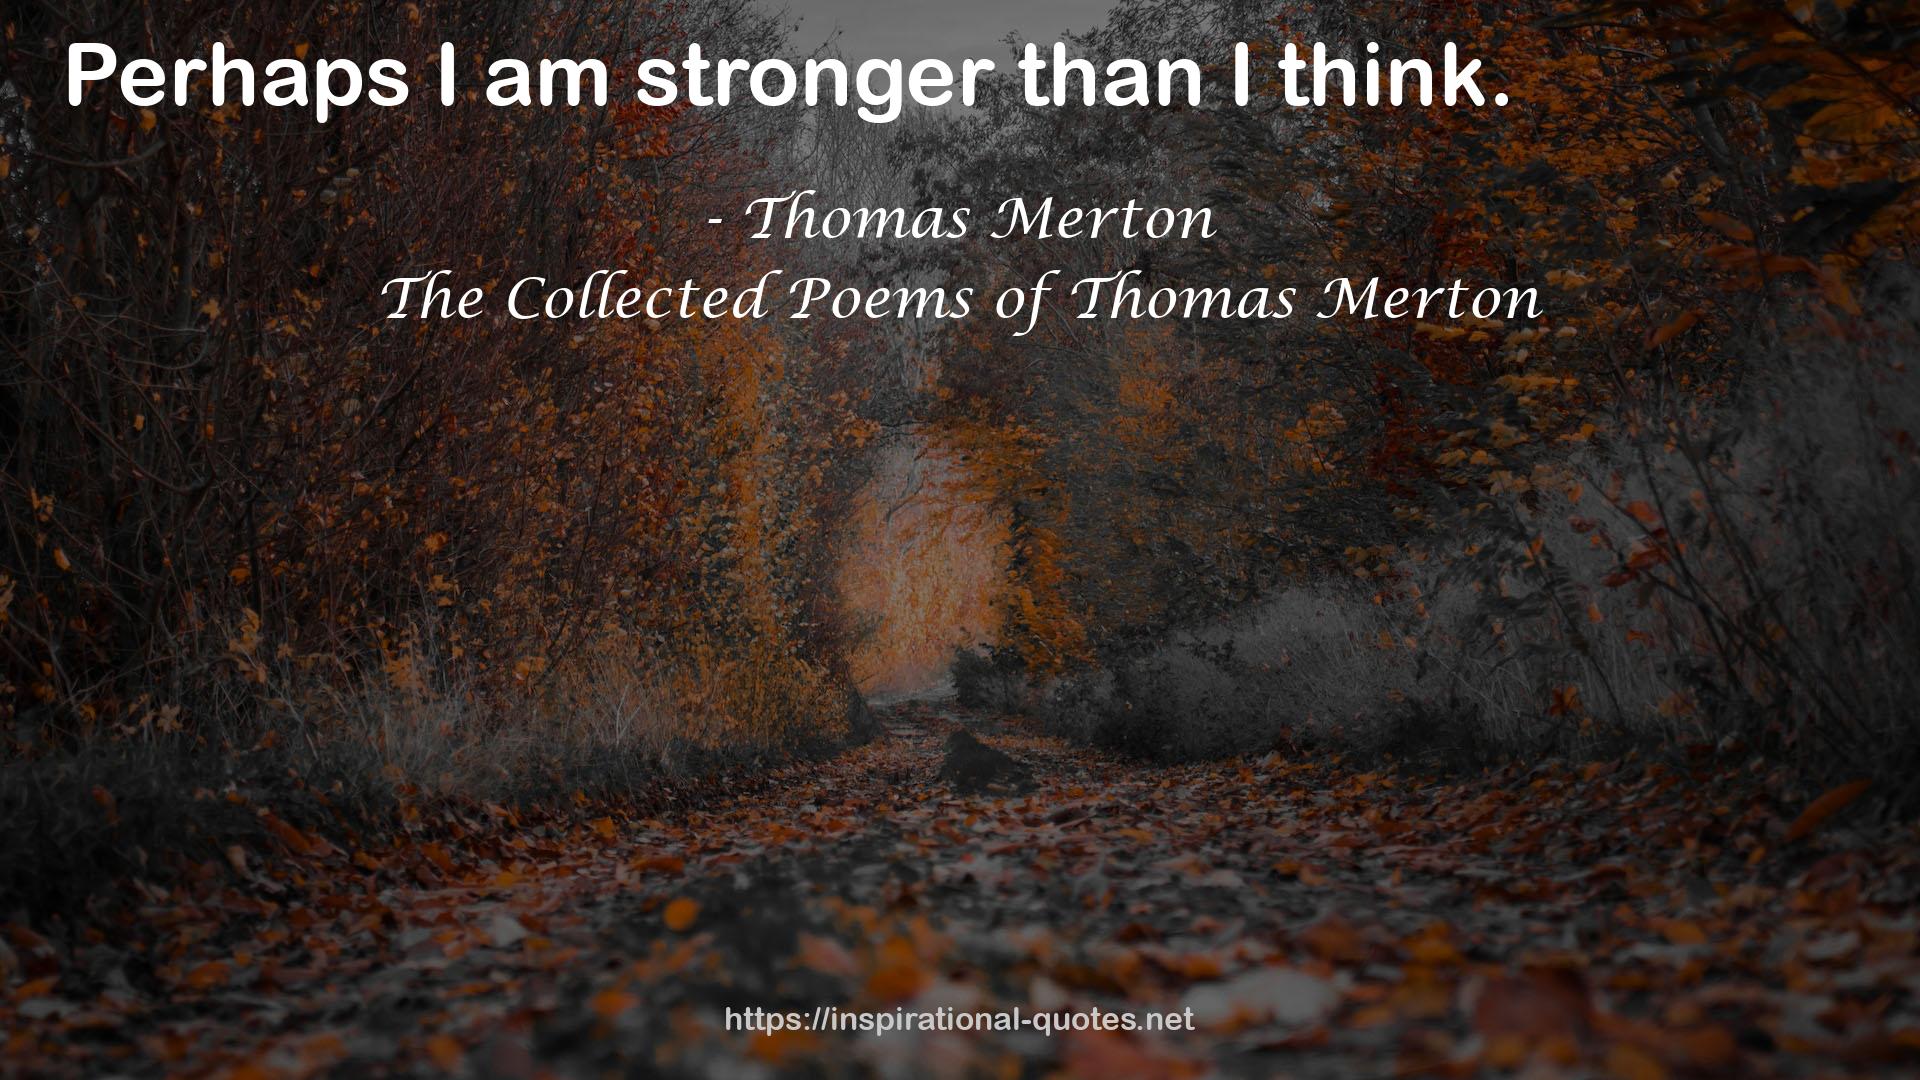 The Collected Poems of Thomas Merton QUOTES